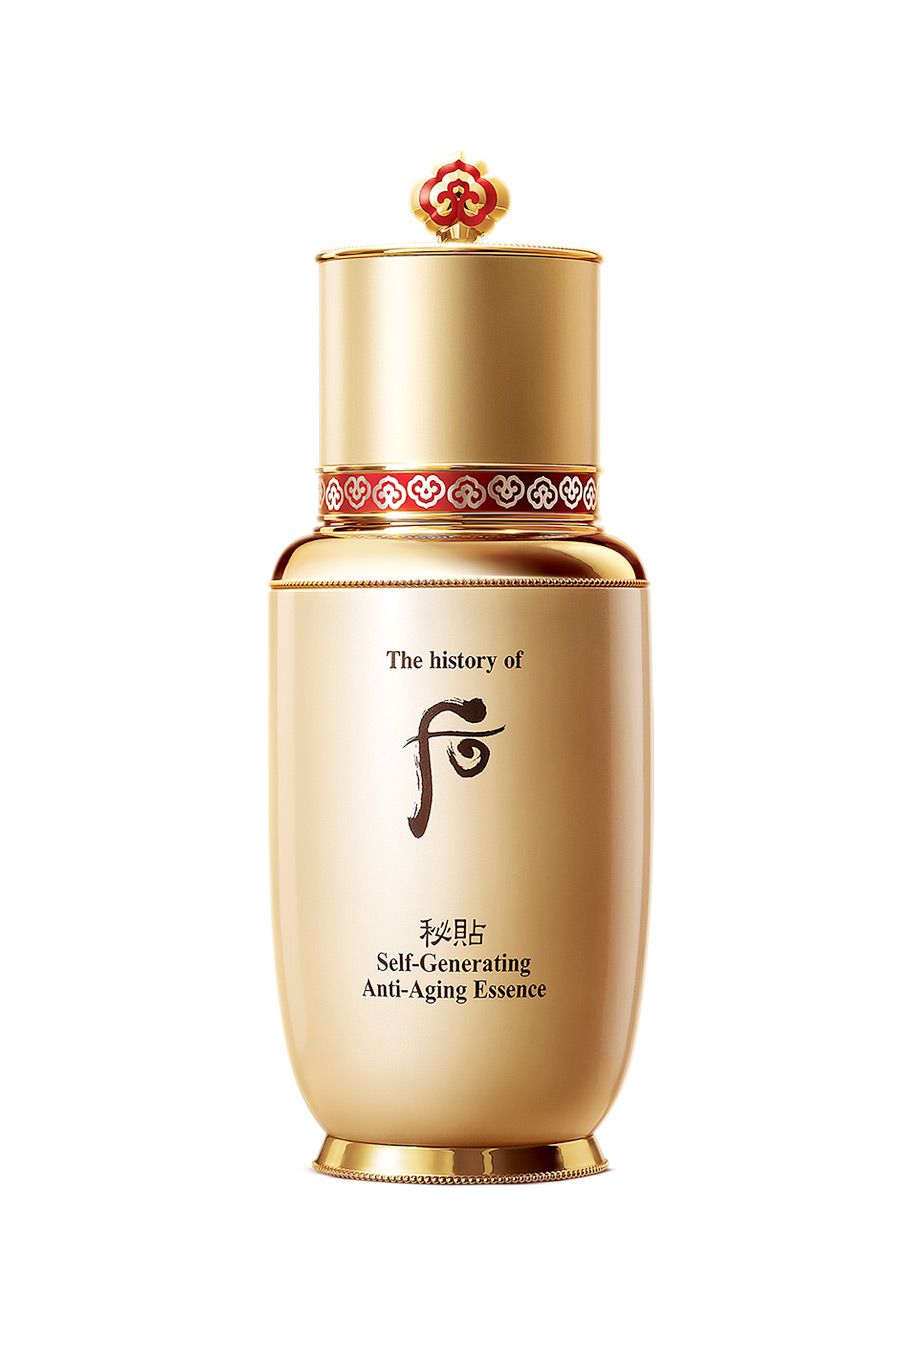 Tinh chất tự sinh The History of Whoo Bichup Self-Generating Anti-Aging Essence